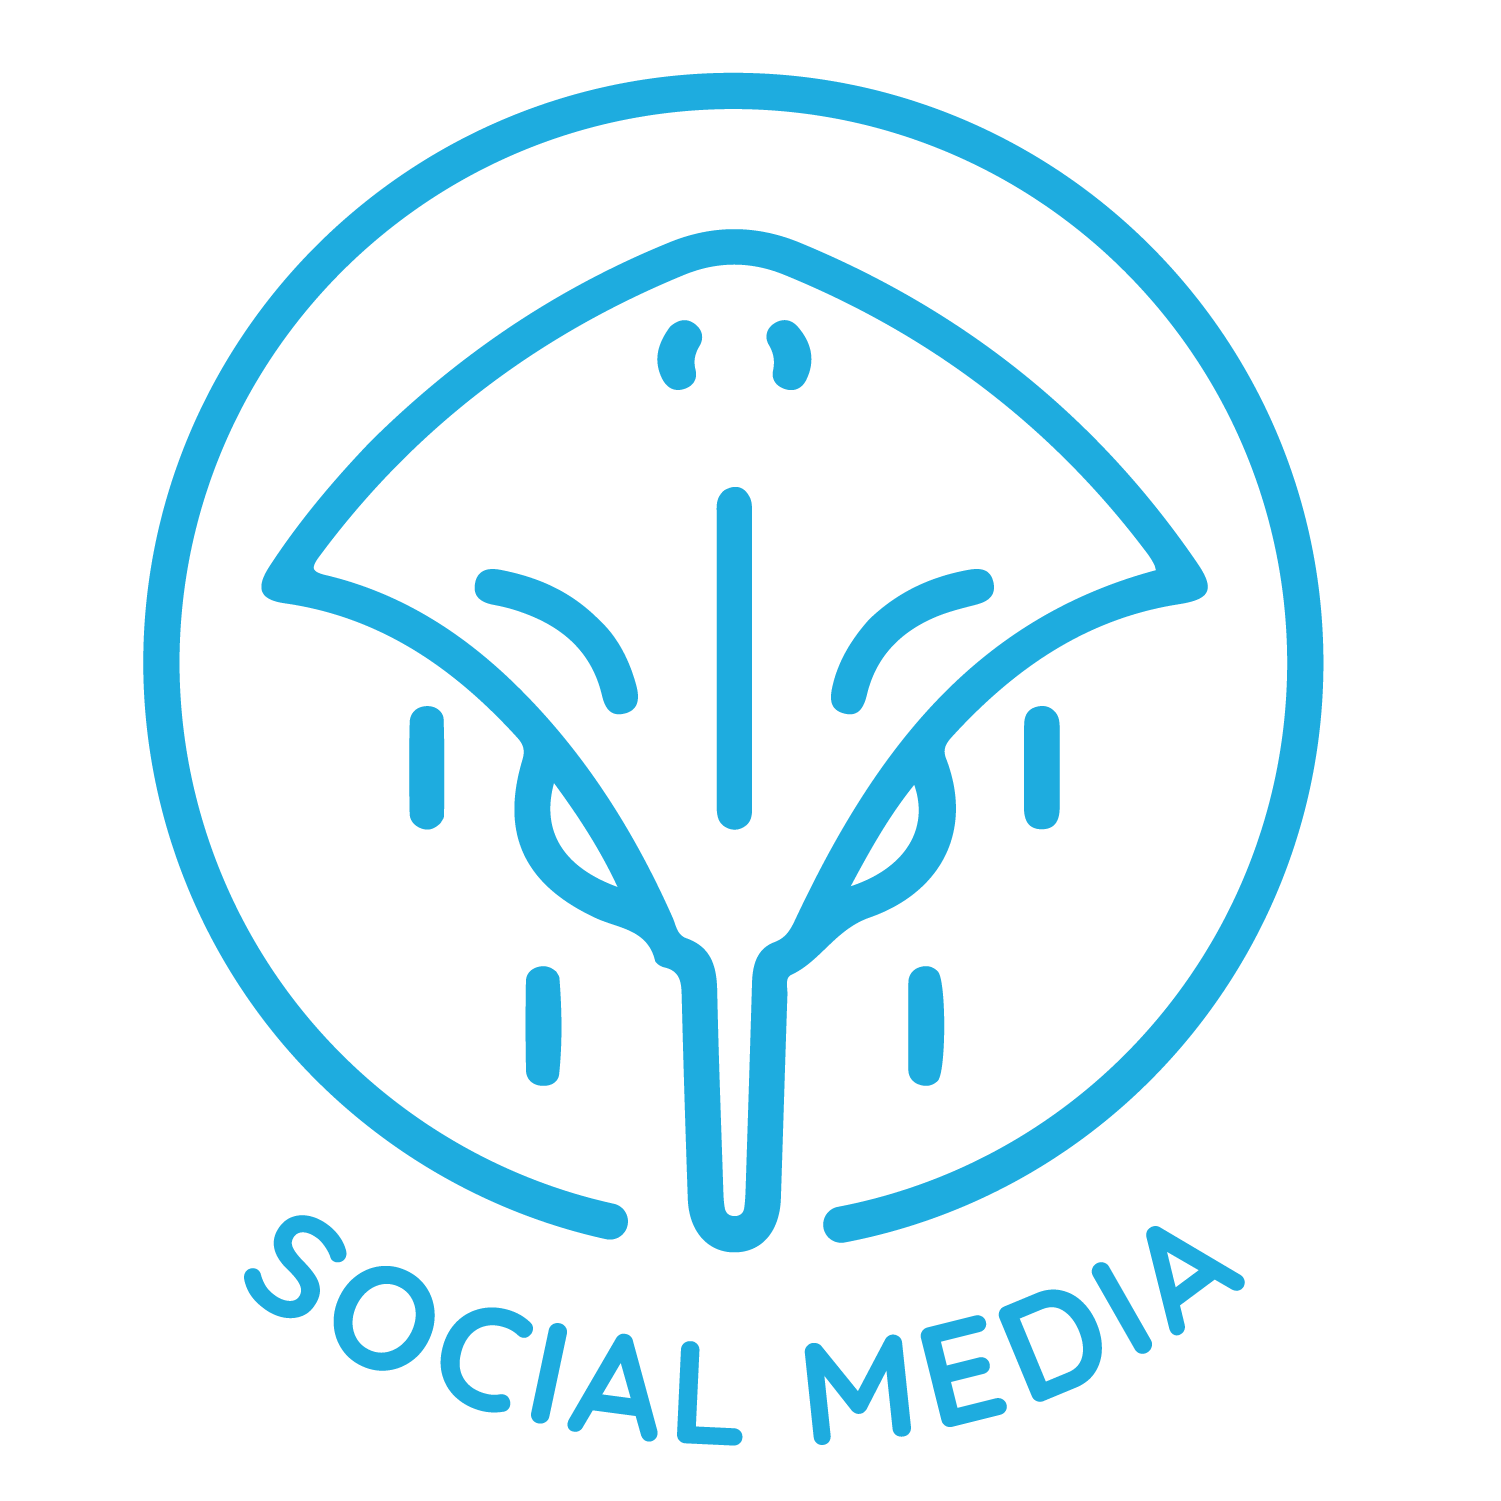 local social media marketing agency, marketing packages